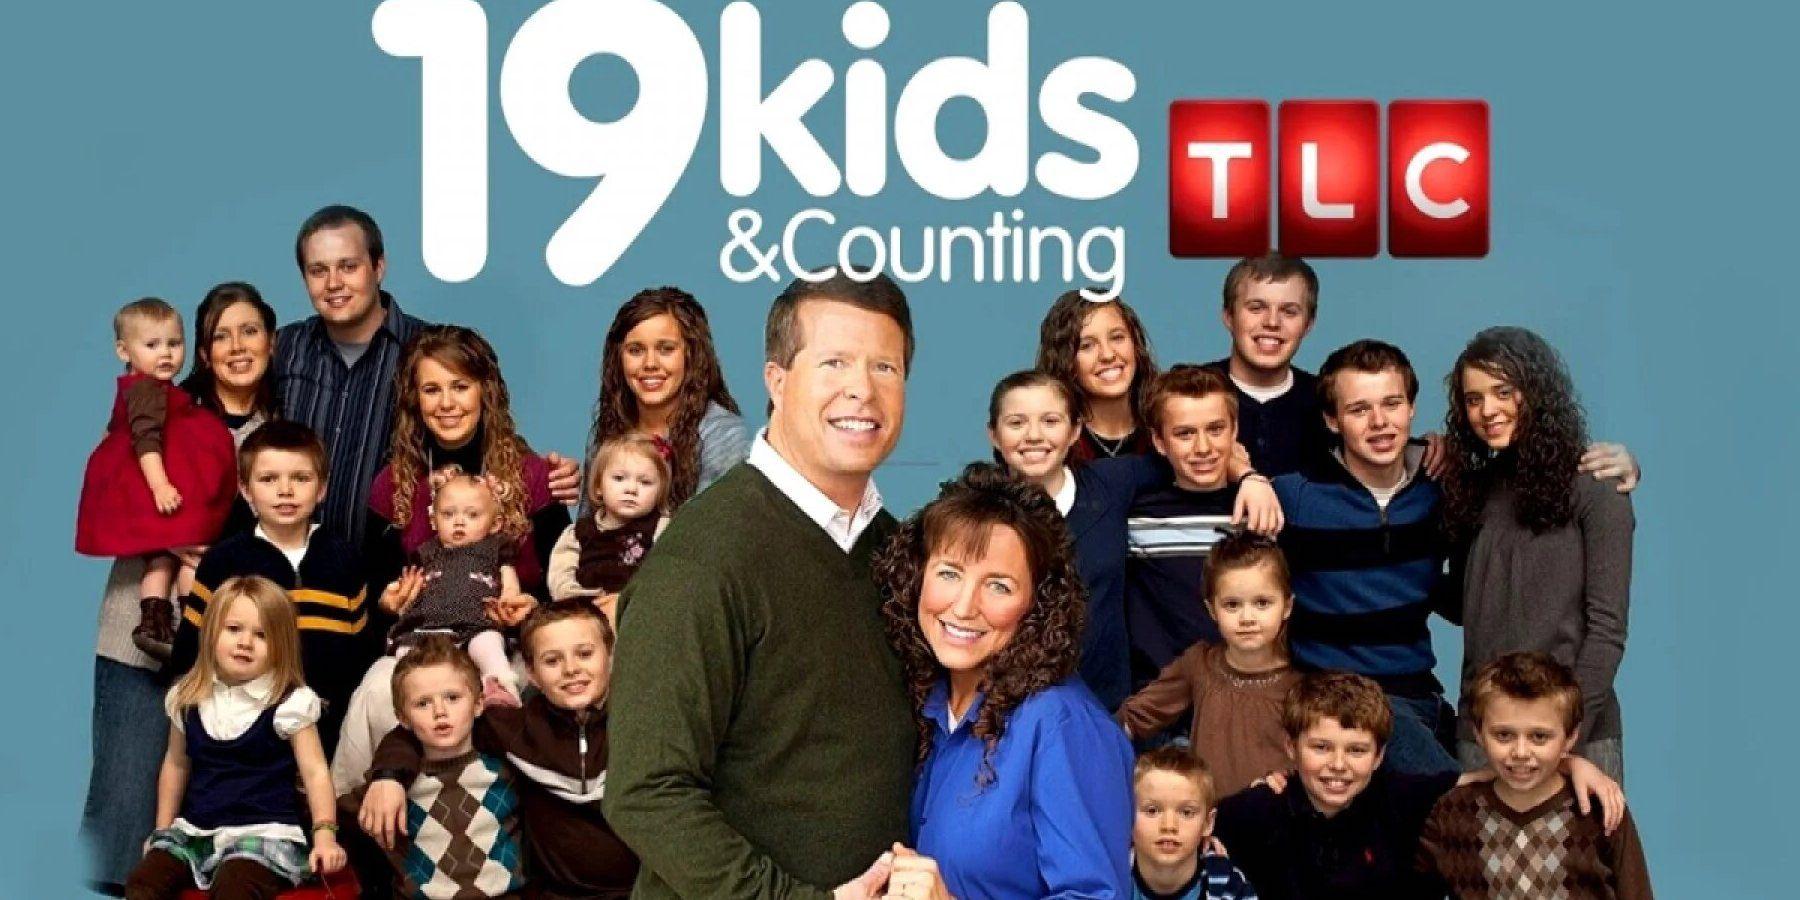 '19 Kids & Counting' promo